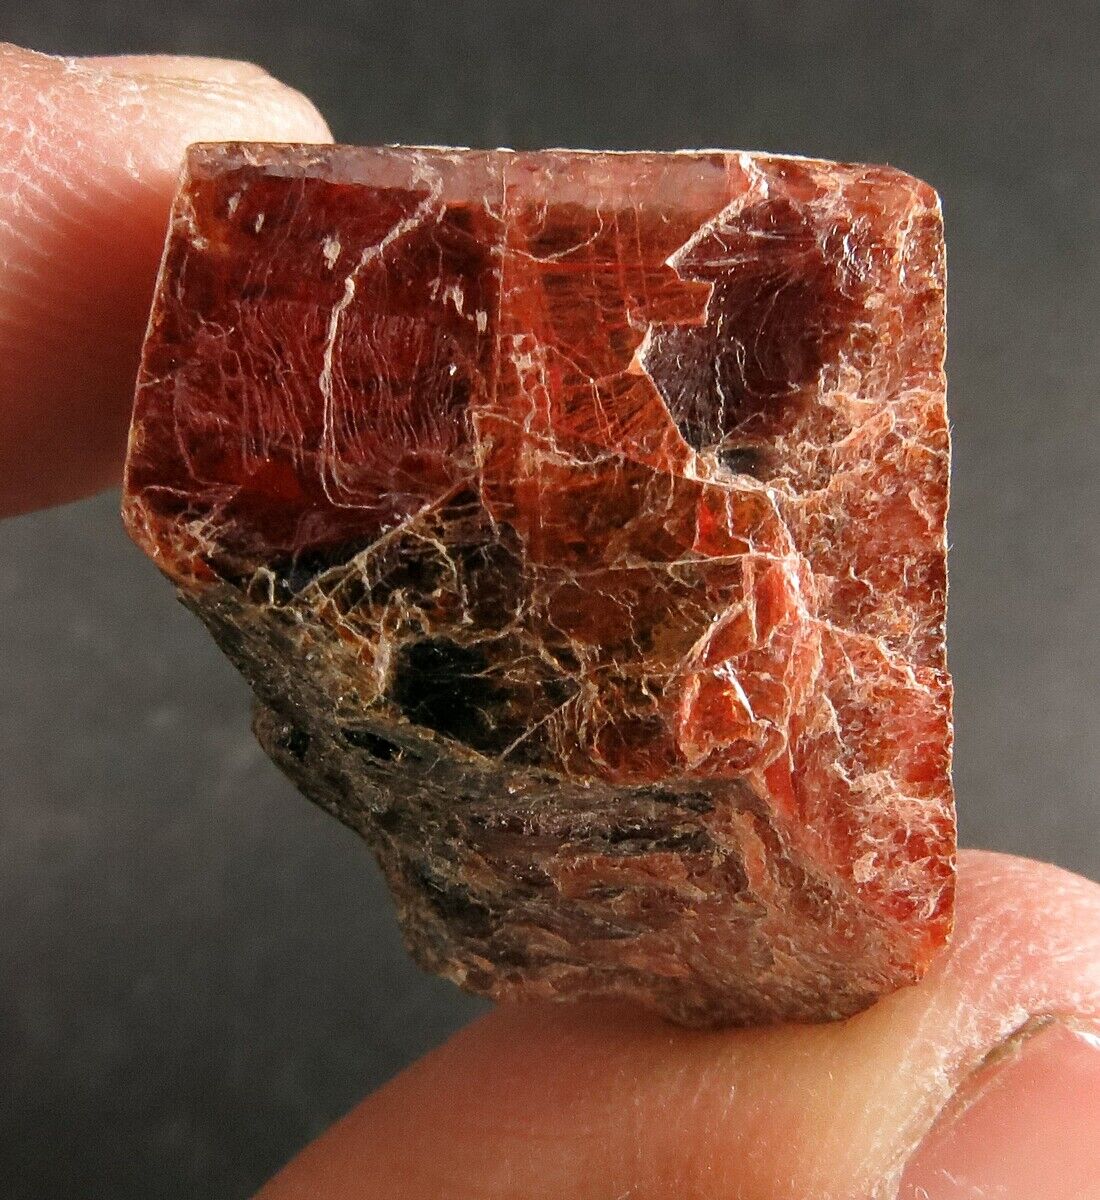 85 CARAT RARE DEEP RED TANTALITE CRYSTAL FROM AFGHANISTAN 